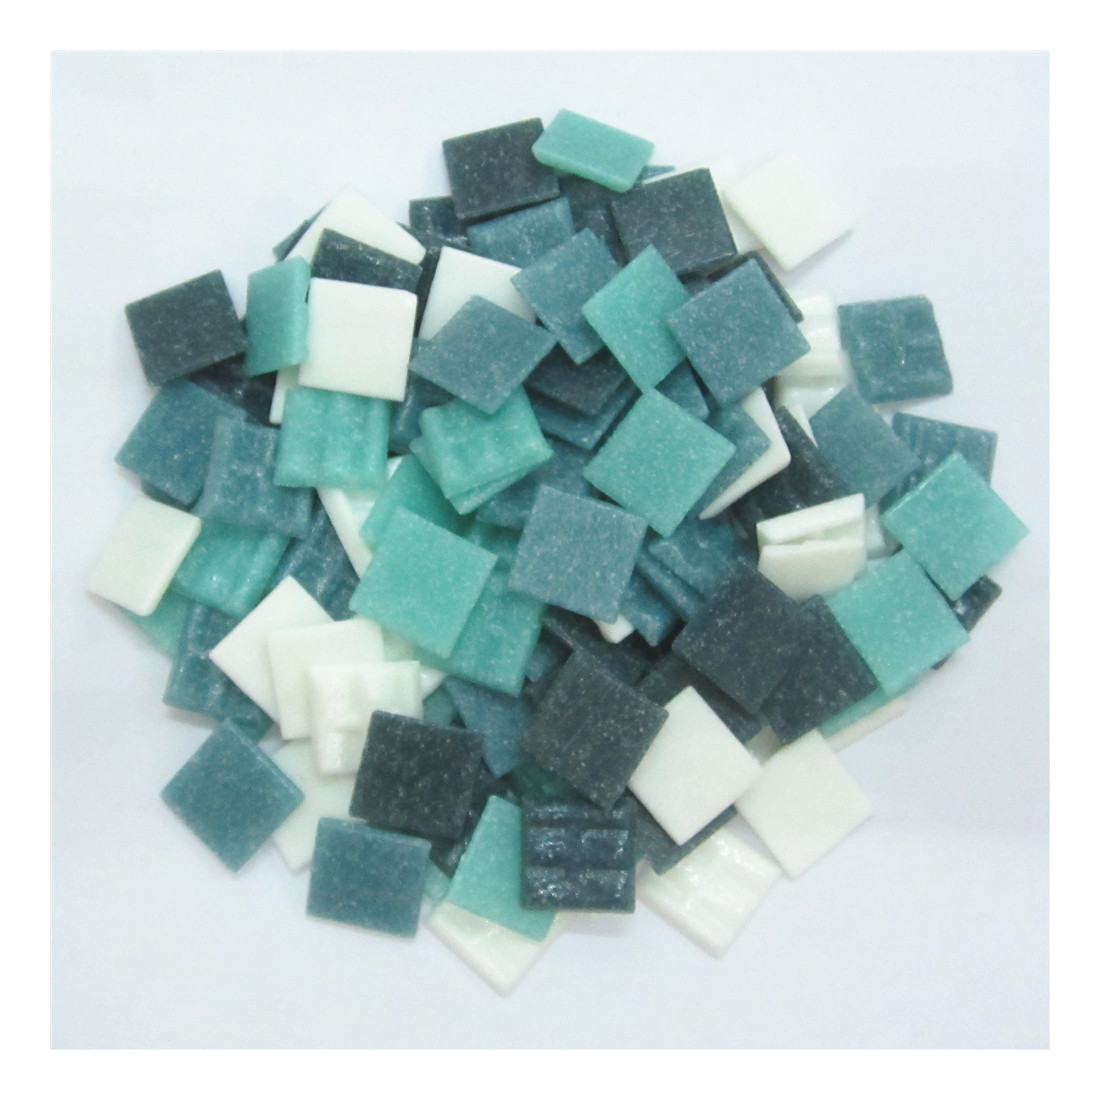 Square Shape Glass Mosaic Tiles for Crafts Colorful Stained Glass Pieces Mosaic